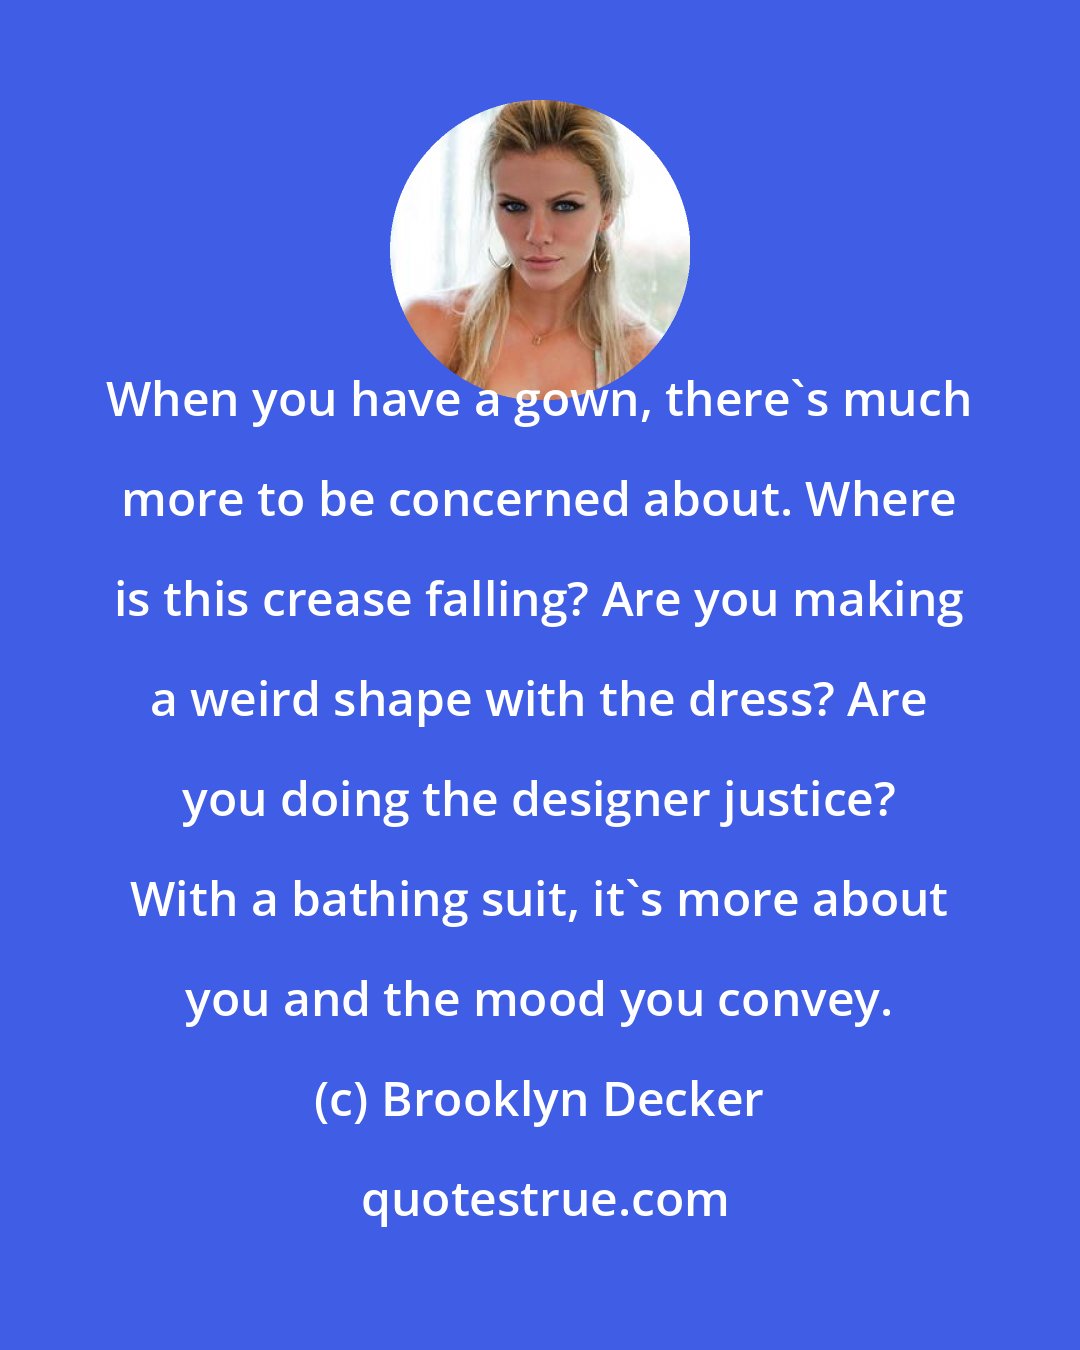 Brooklyn Decker: When you have a gown, there's much more to be concerned about. Where is this crease falling? Are you making a weird shape with the dress? Are you doing the designer justice? With a bathing suit, it's more about you and the mood you convey.